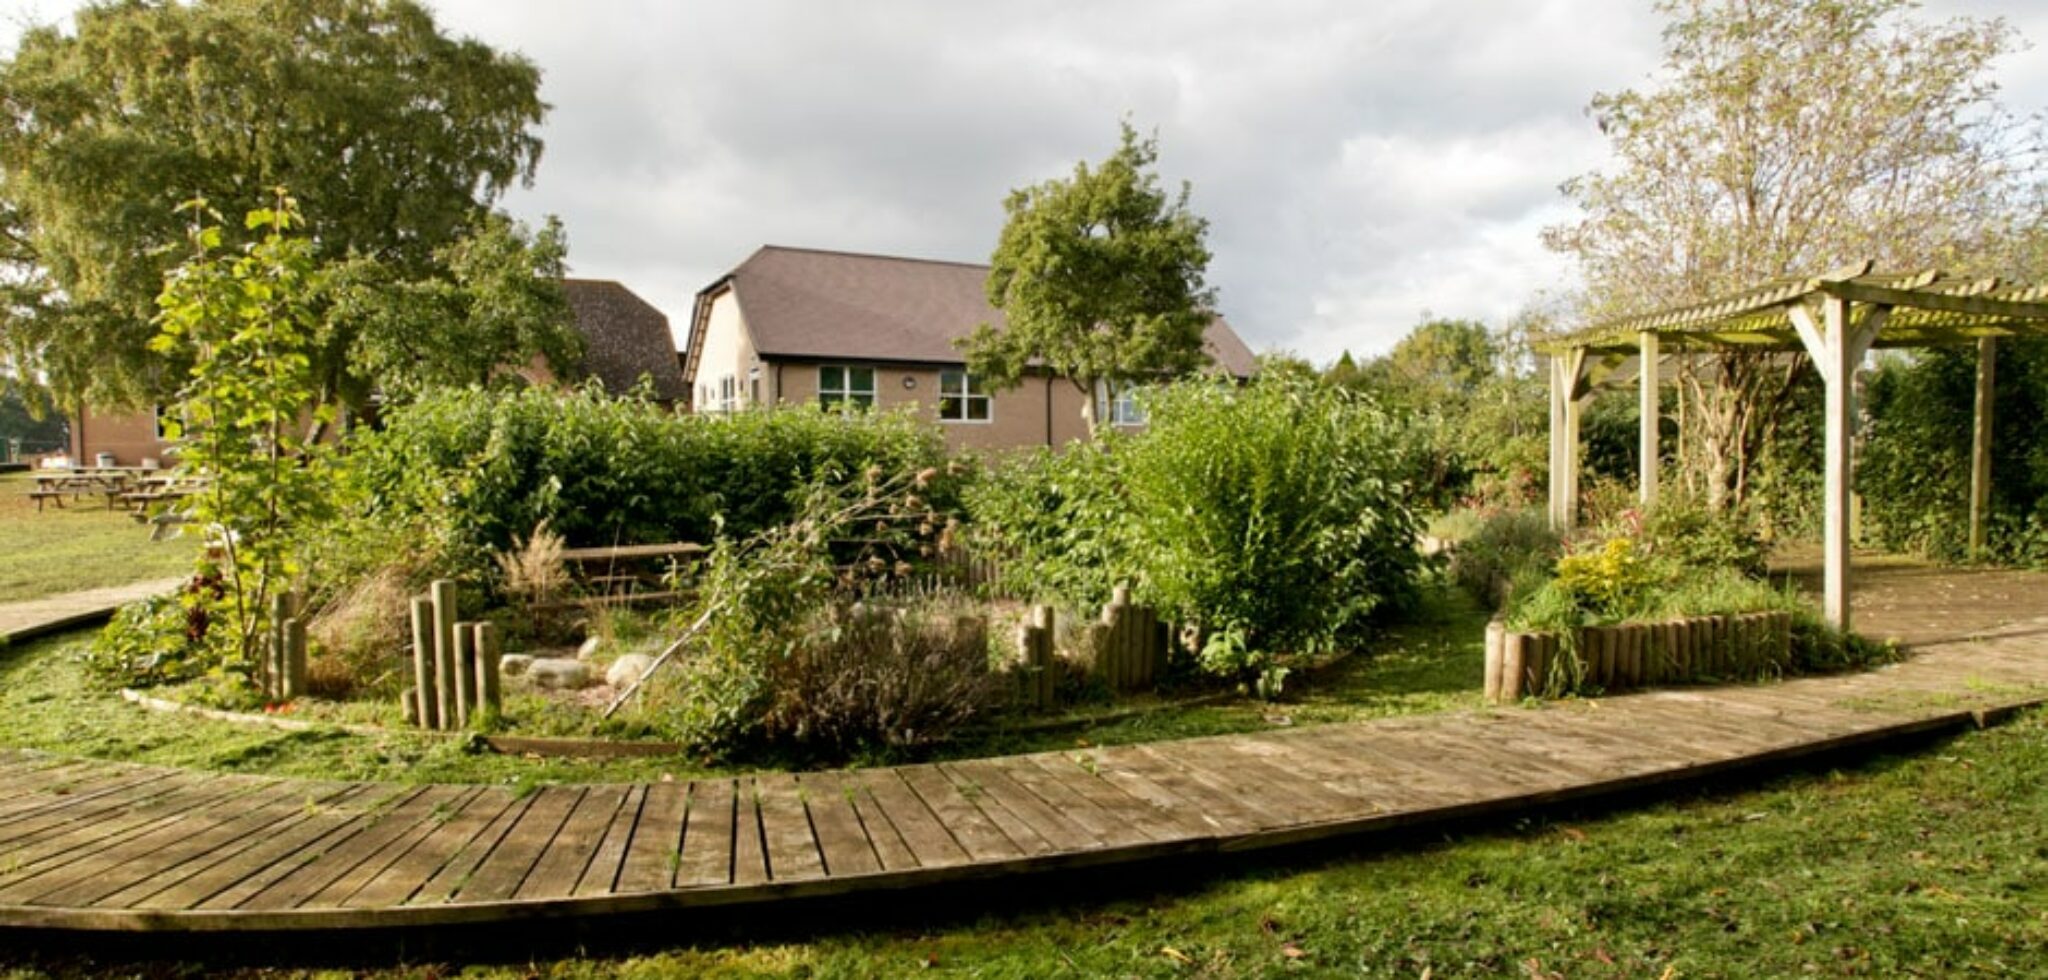 picture of garden and a building